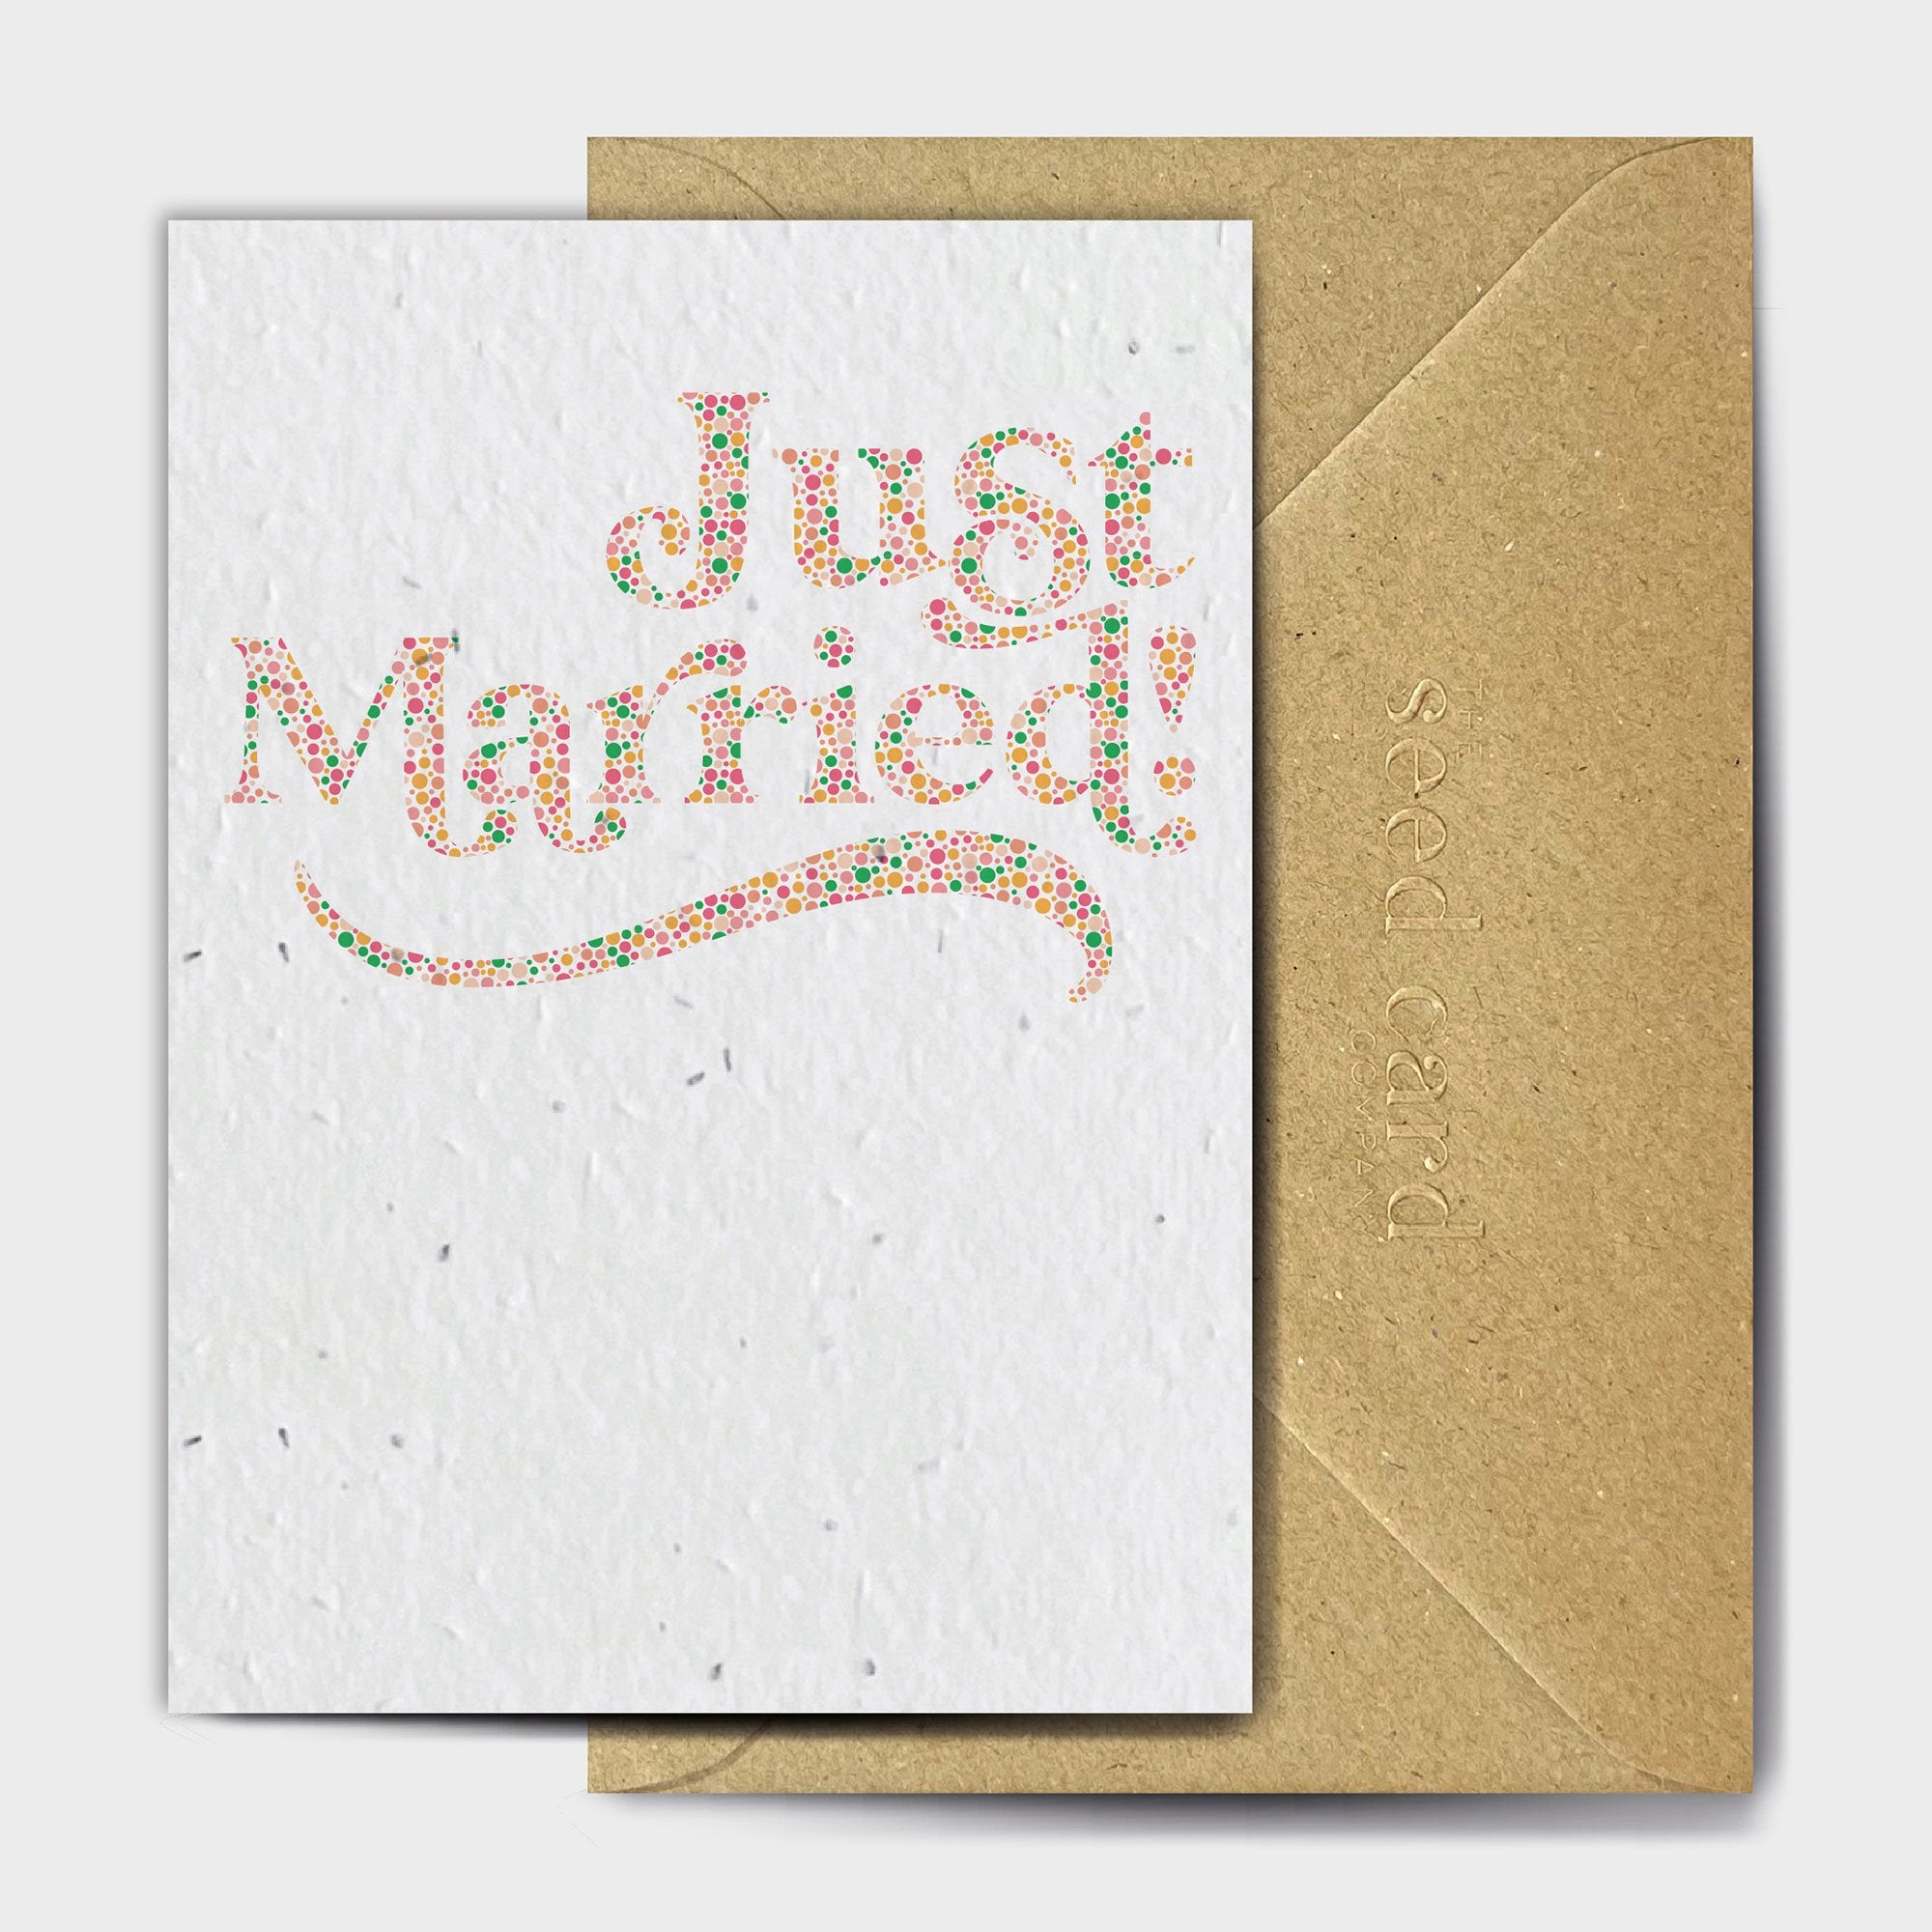 Shop online Just Dotting Married - 100% biodegradable seed-embedded cards Shop -The Seed Card Company